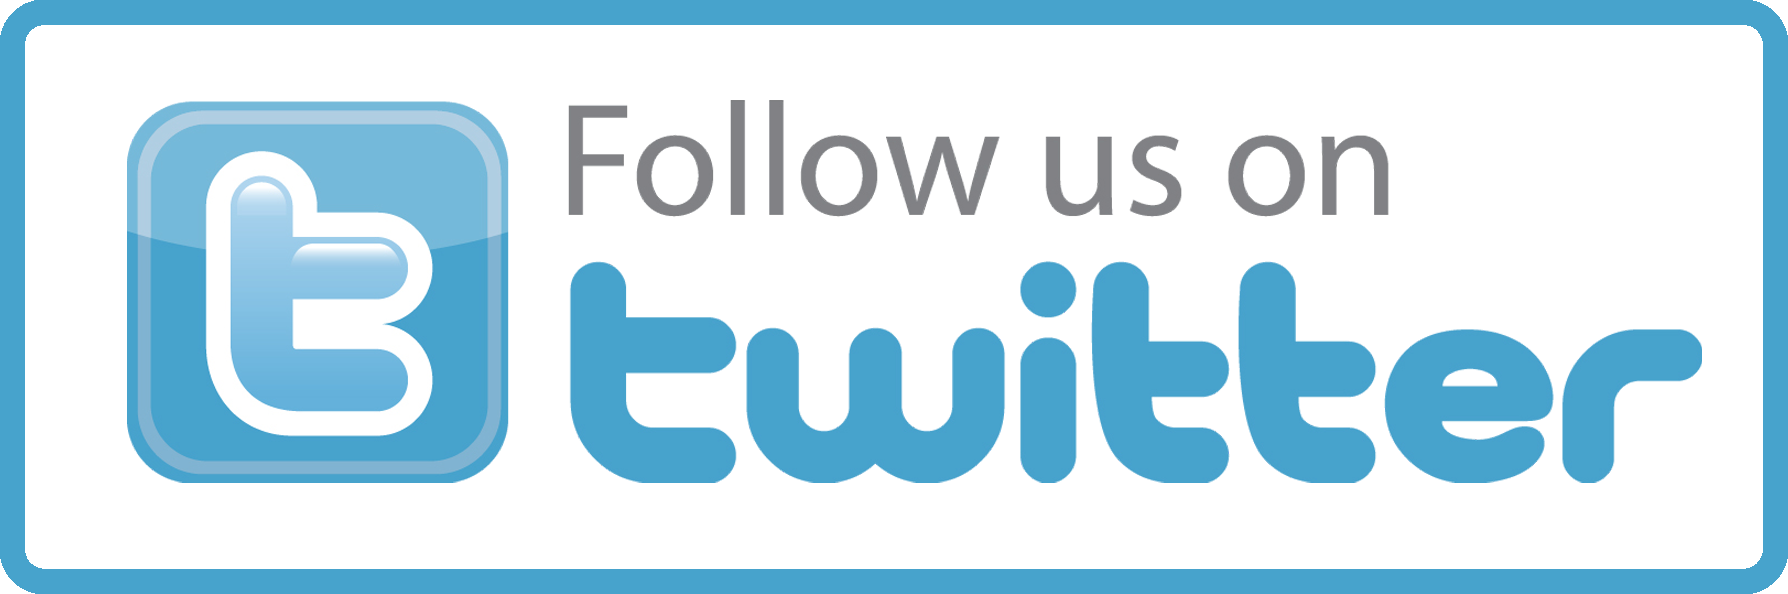 Twitter follow button png. Images name twitterbuttonpng